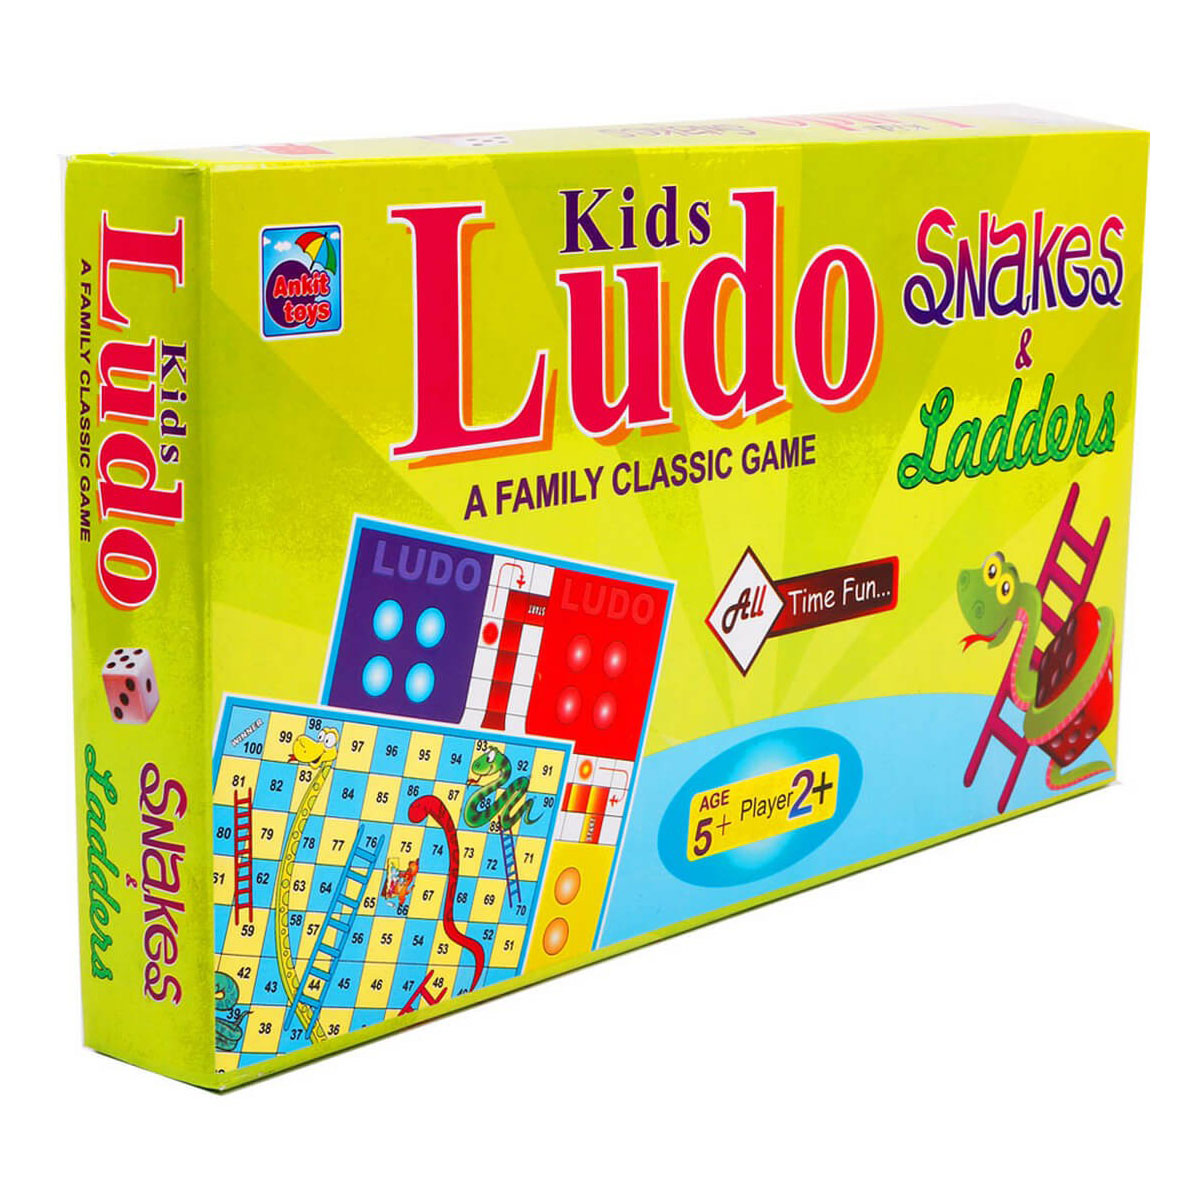 Ankit Ludo Snake & Ladders Classic Game